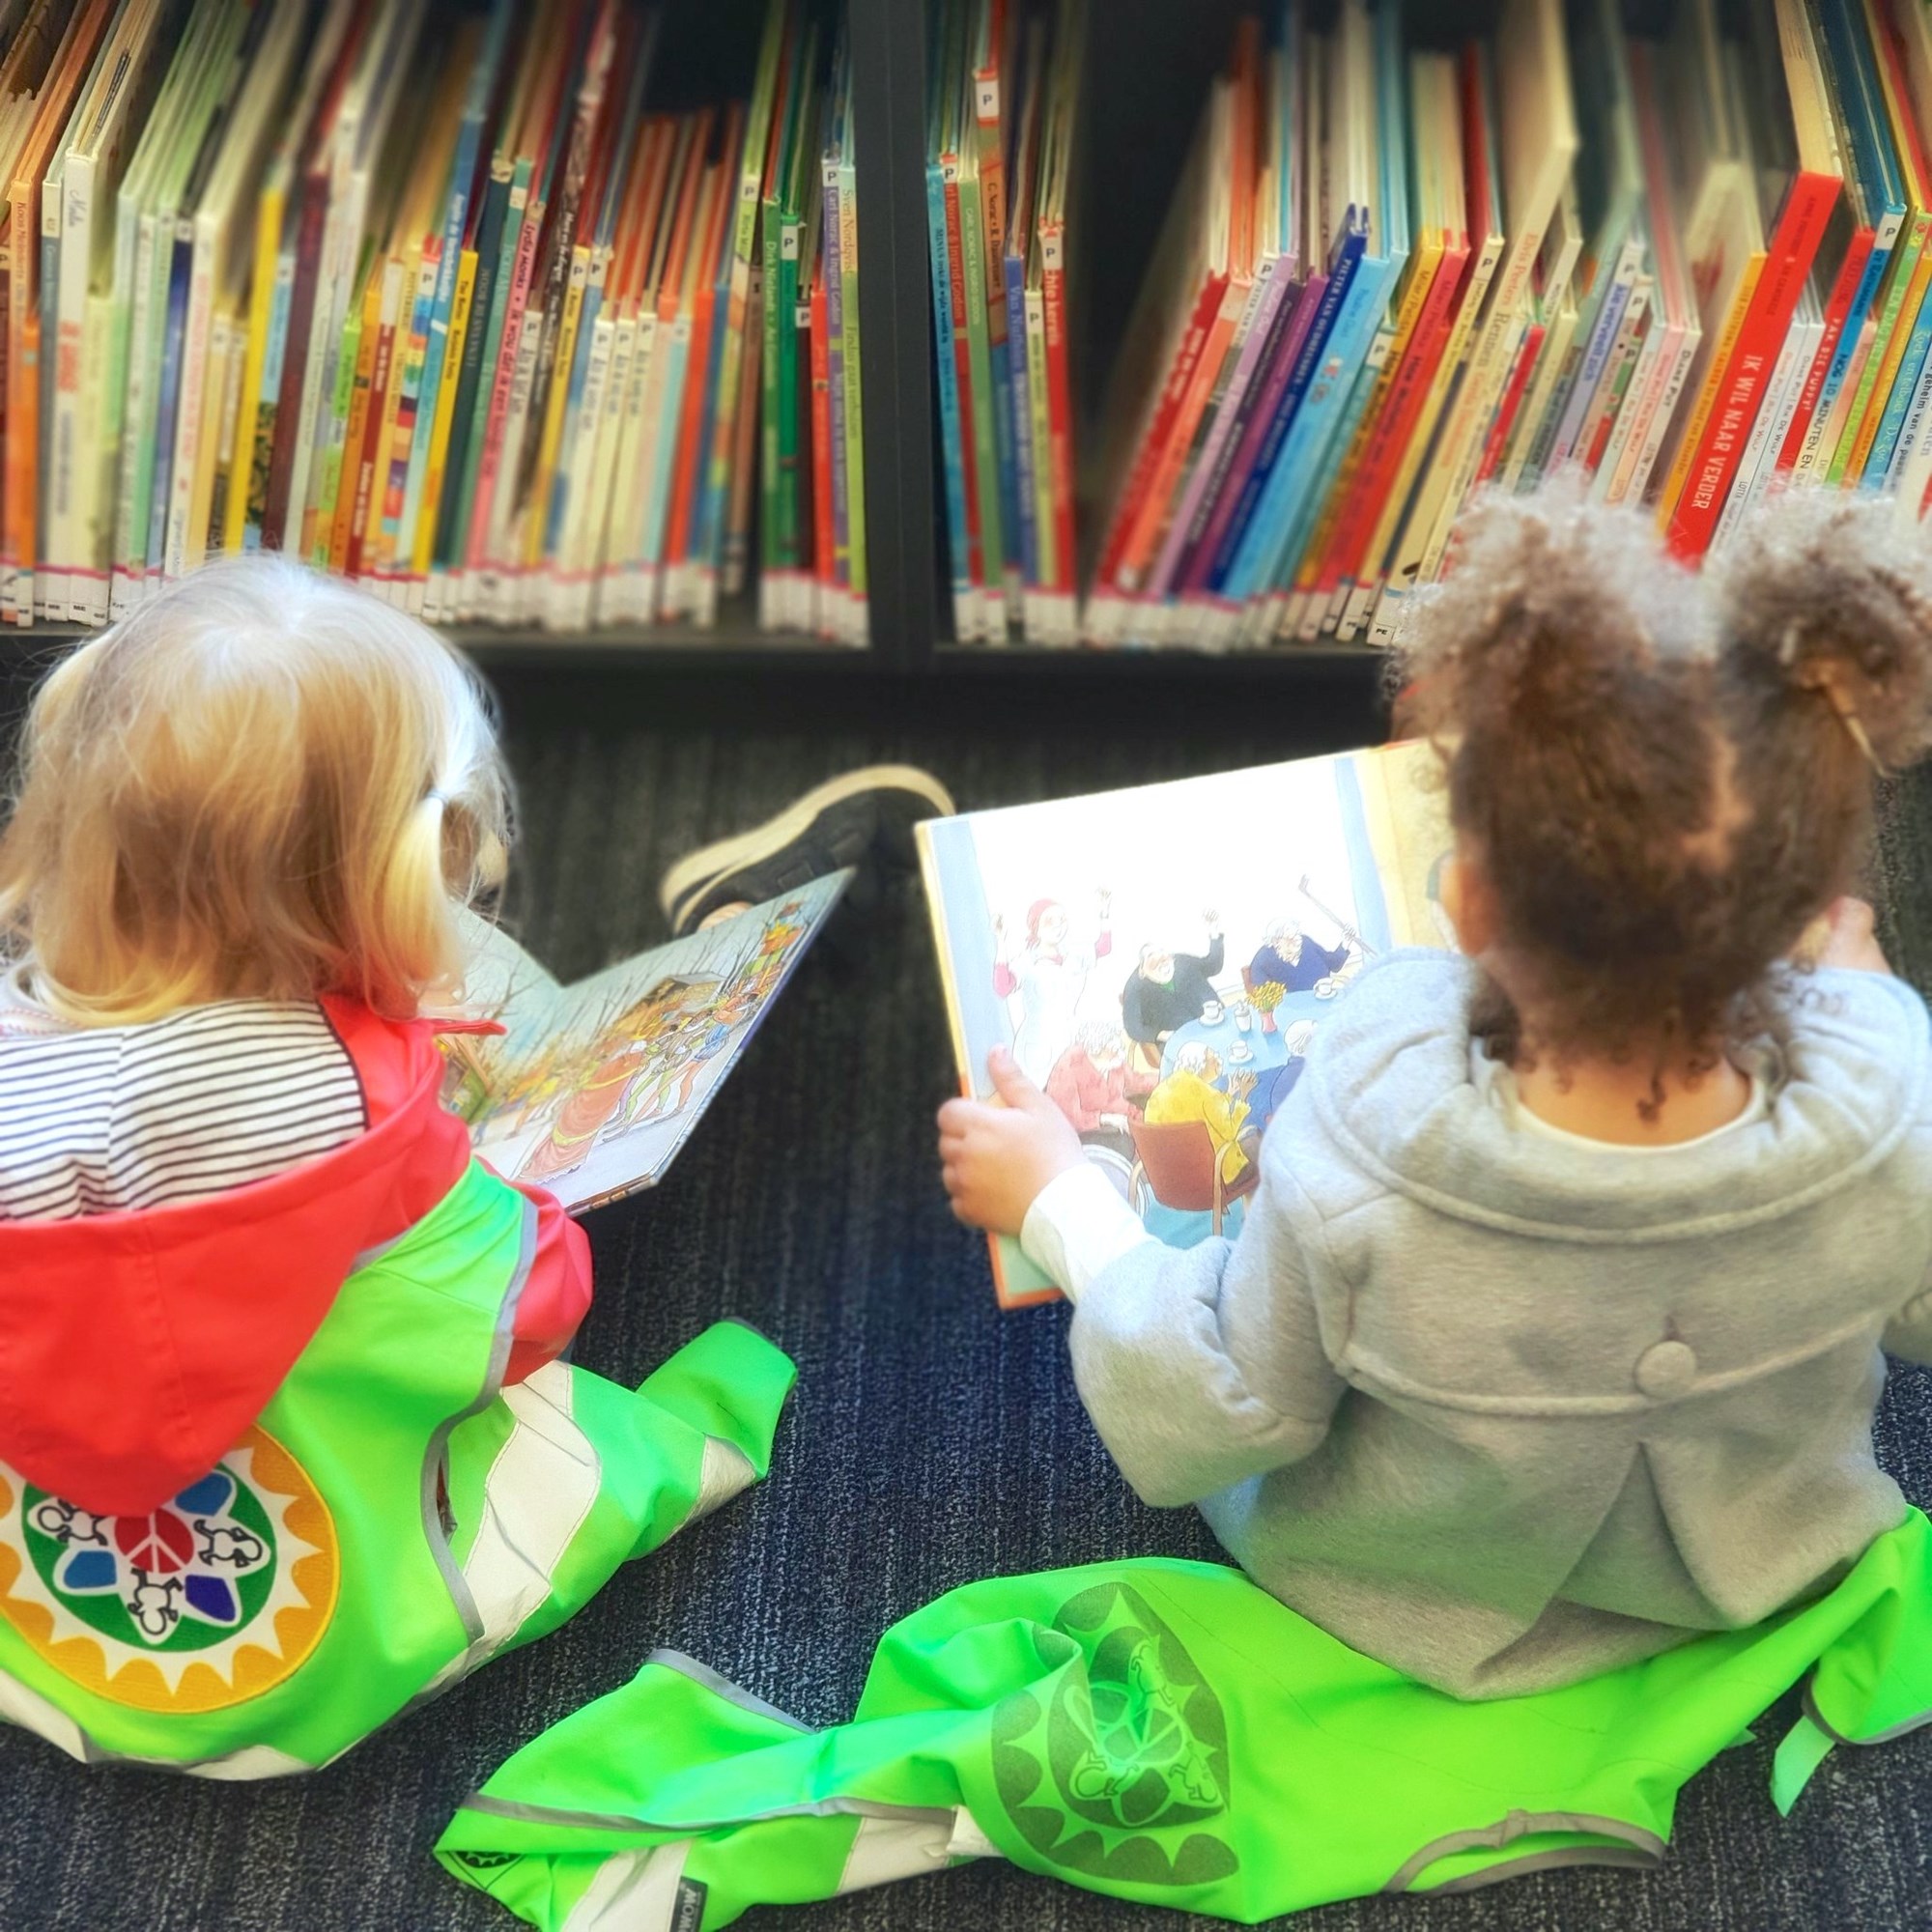 Two small children reading while sitting on library floor